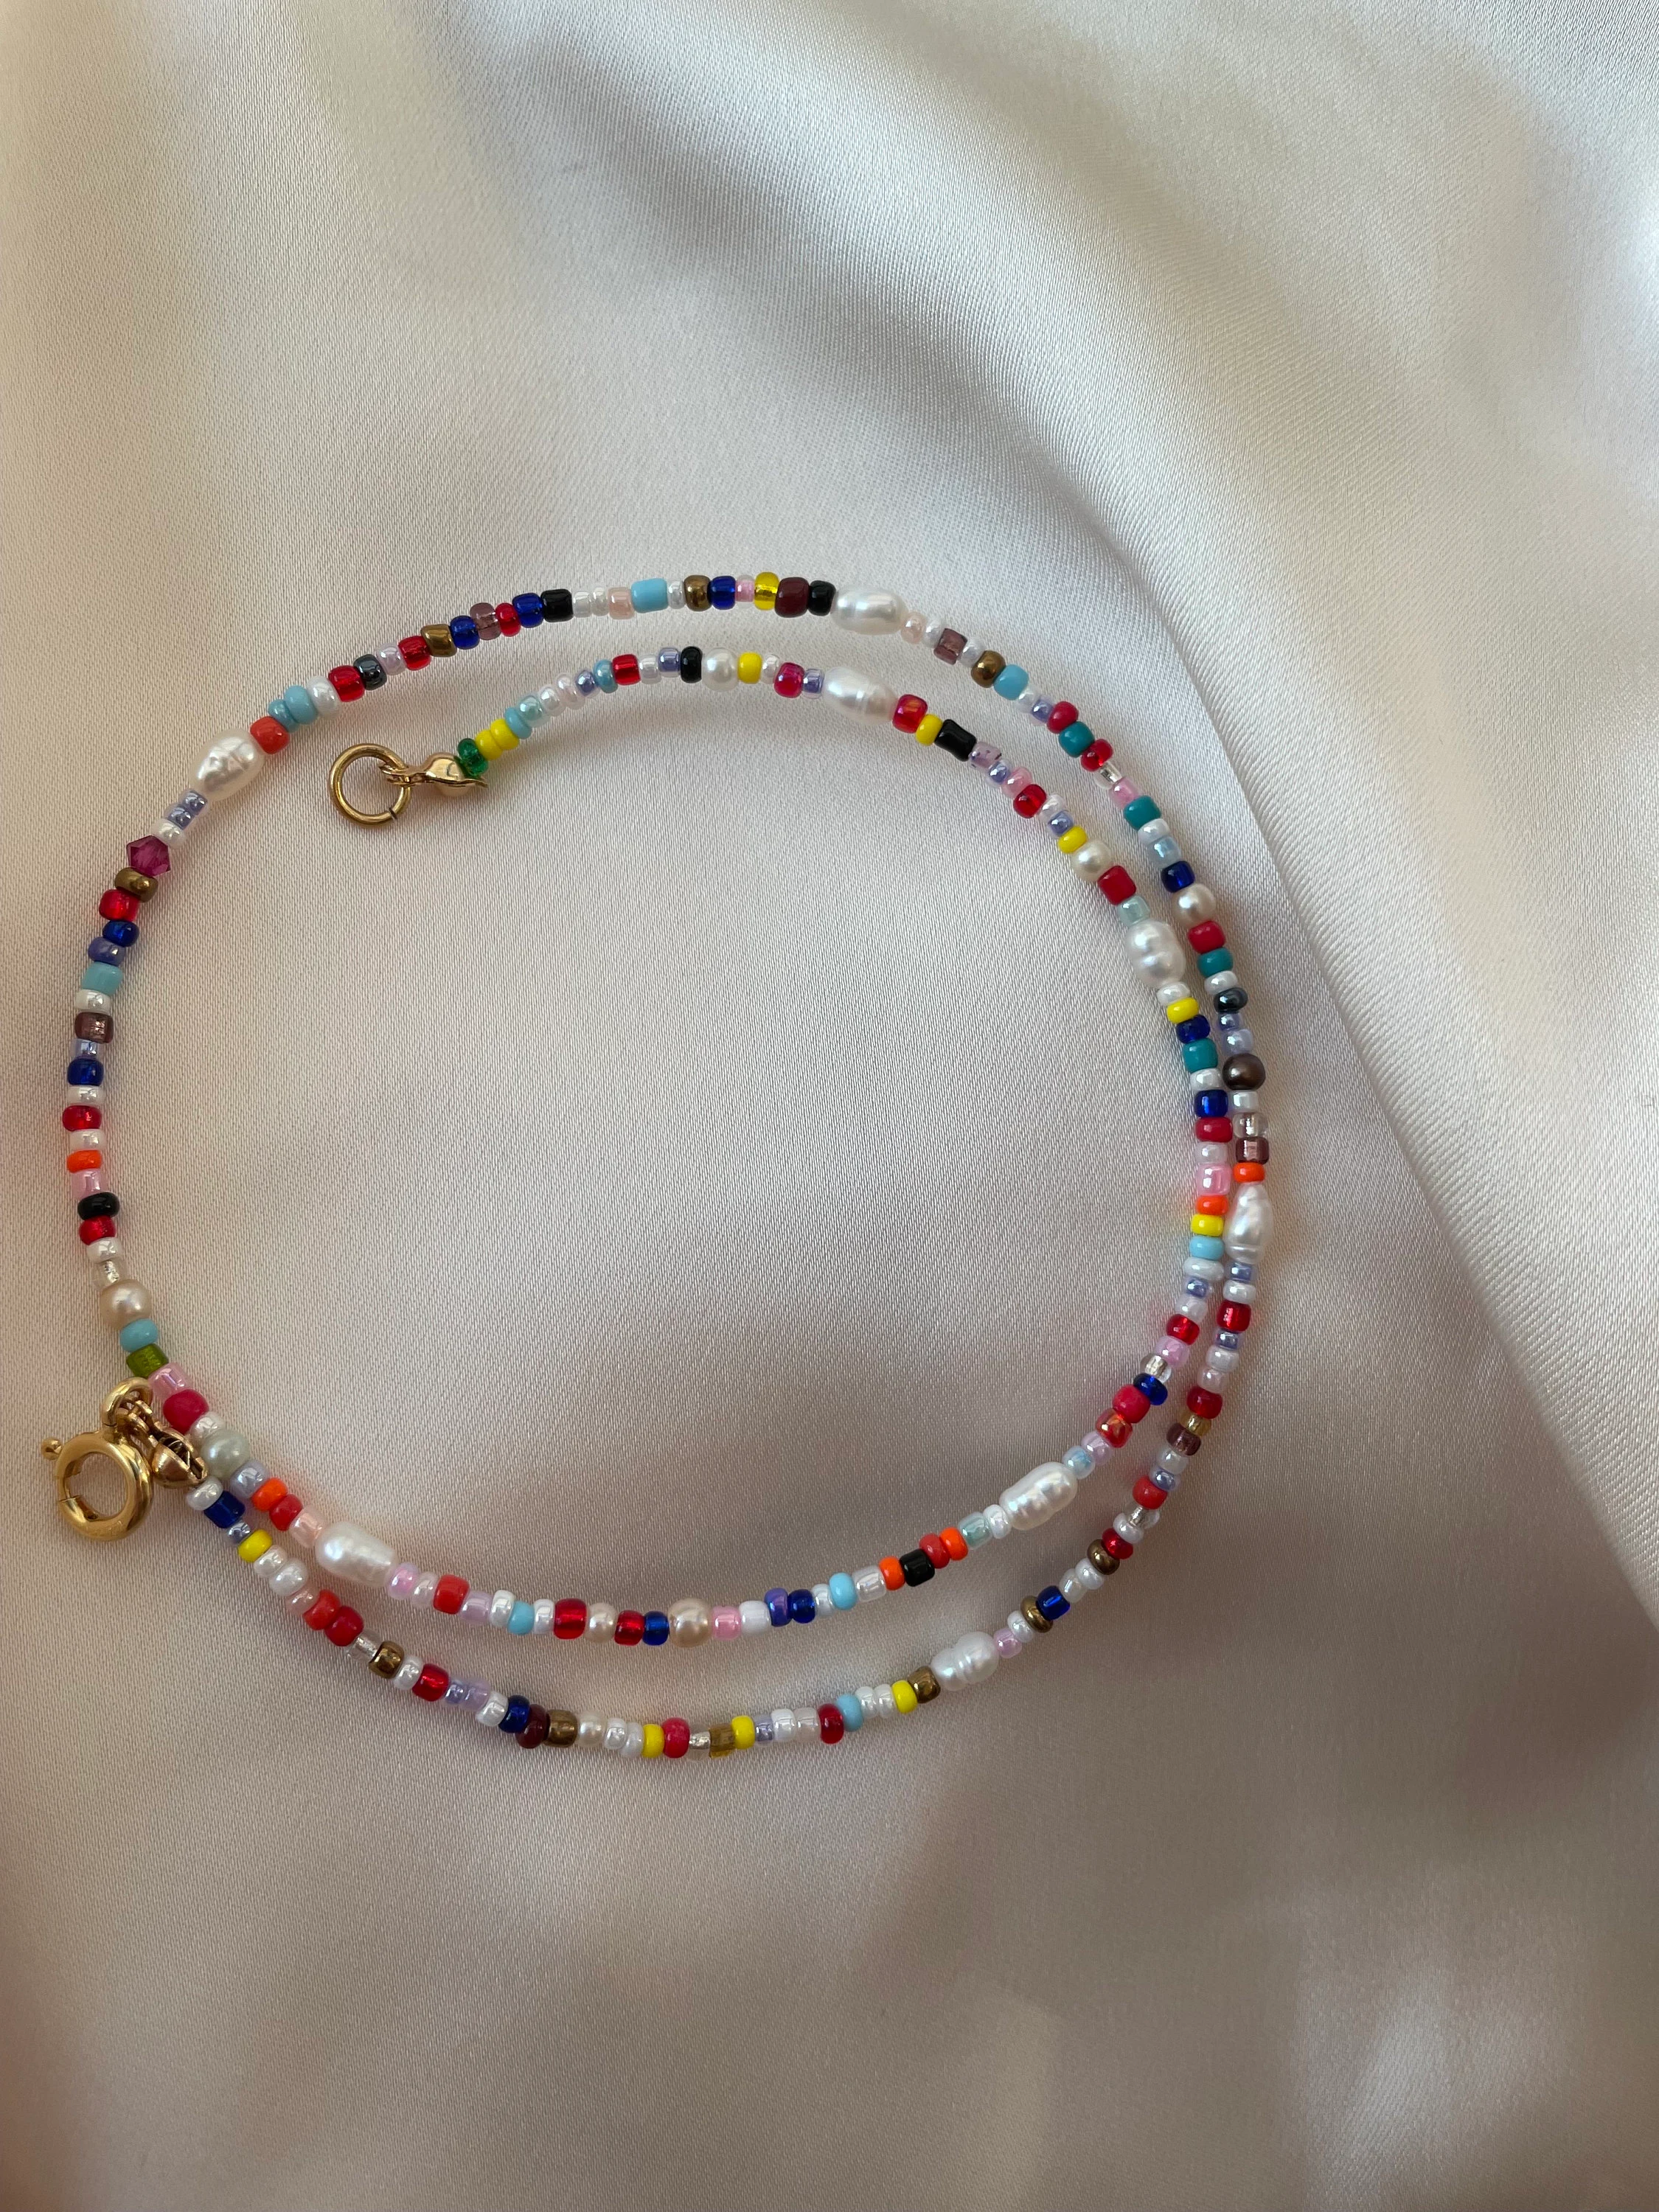 Jewelry :: Necklaces :: Beaded Necklaces :: Rainbow + Pearl Necklace